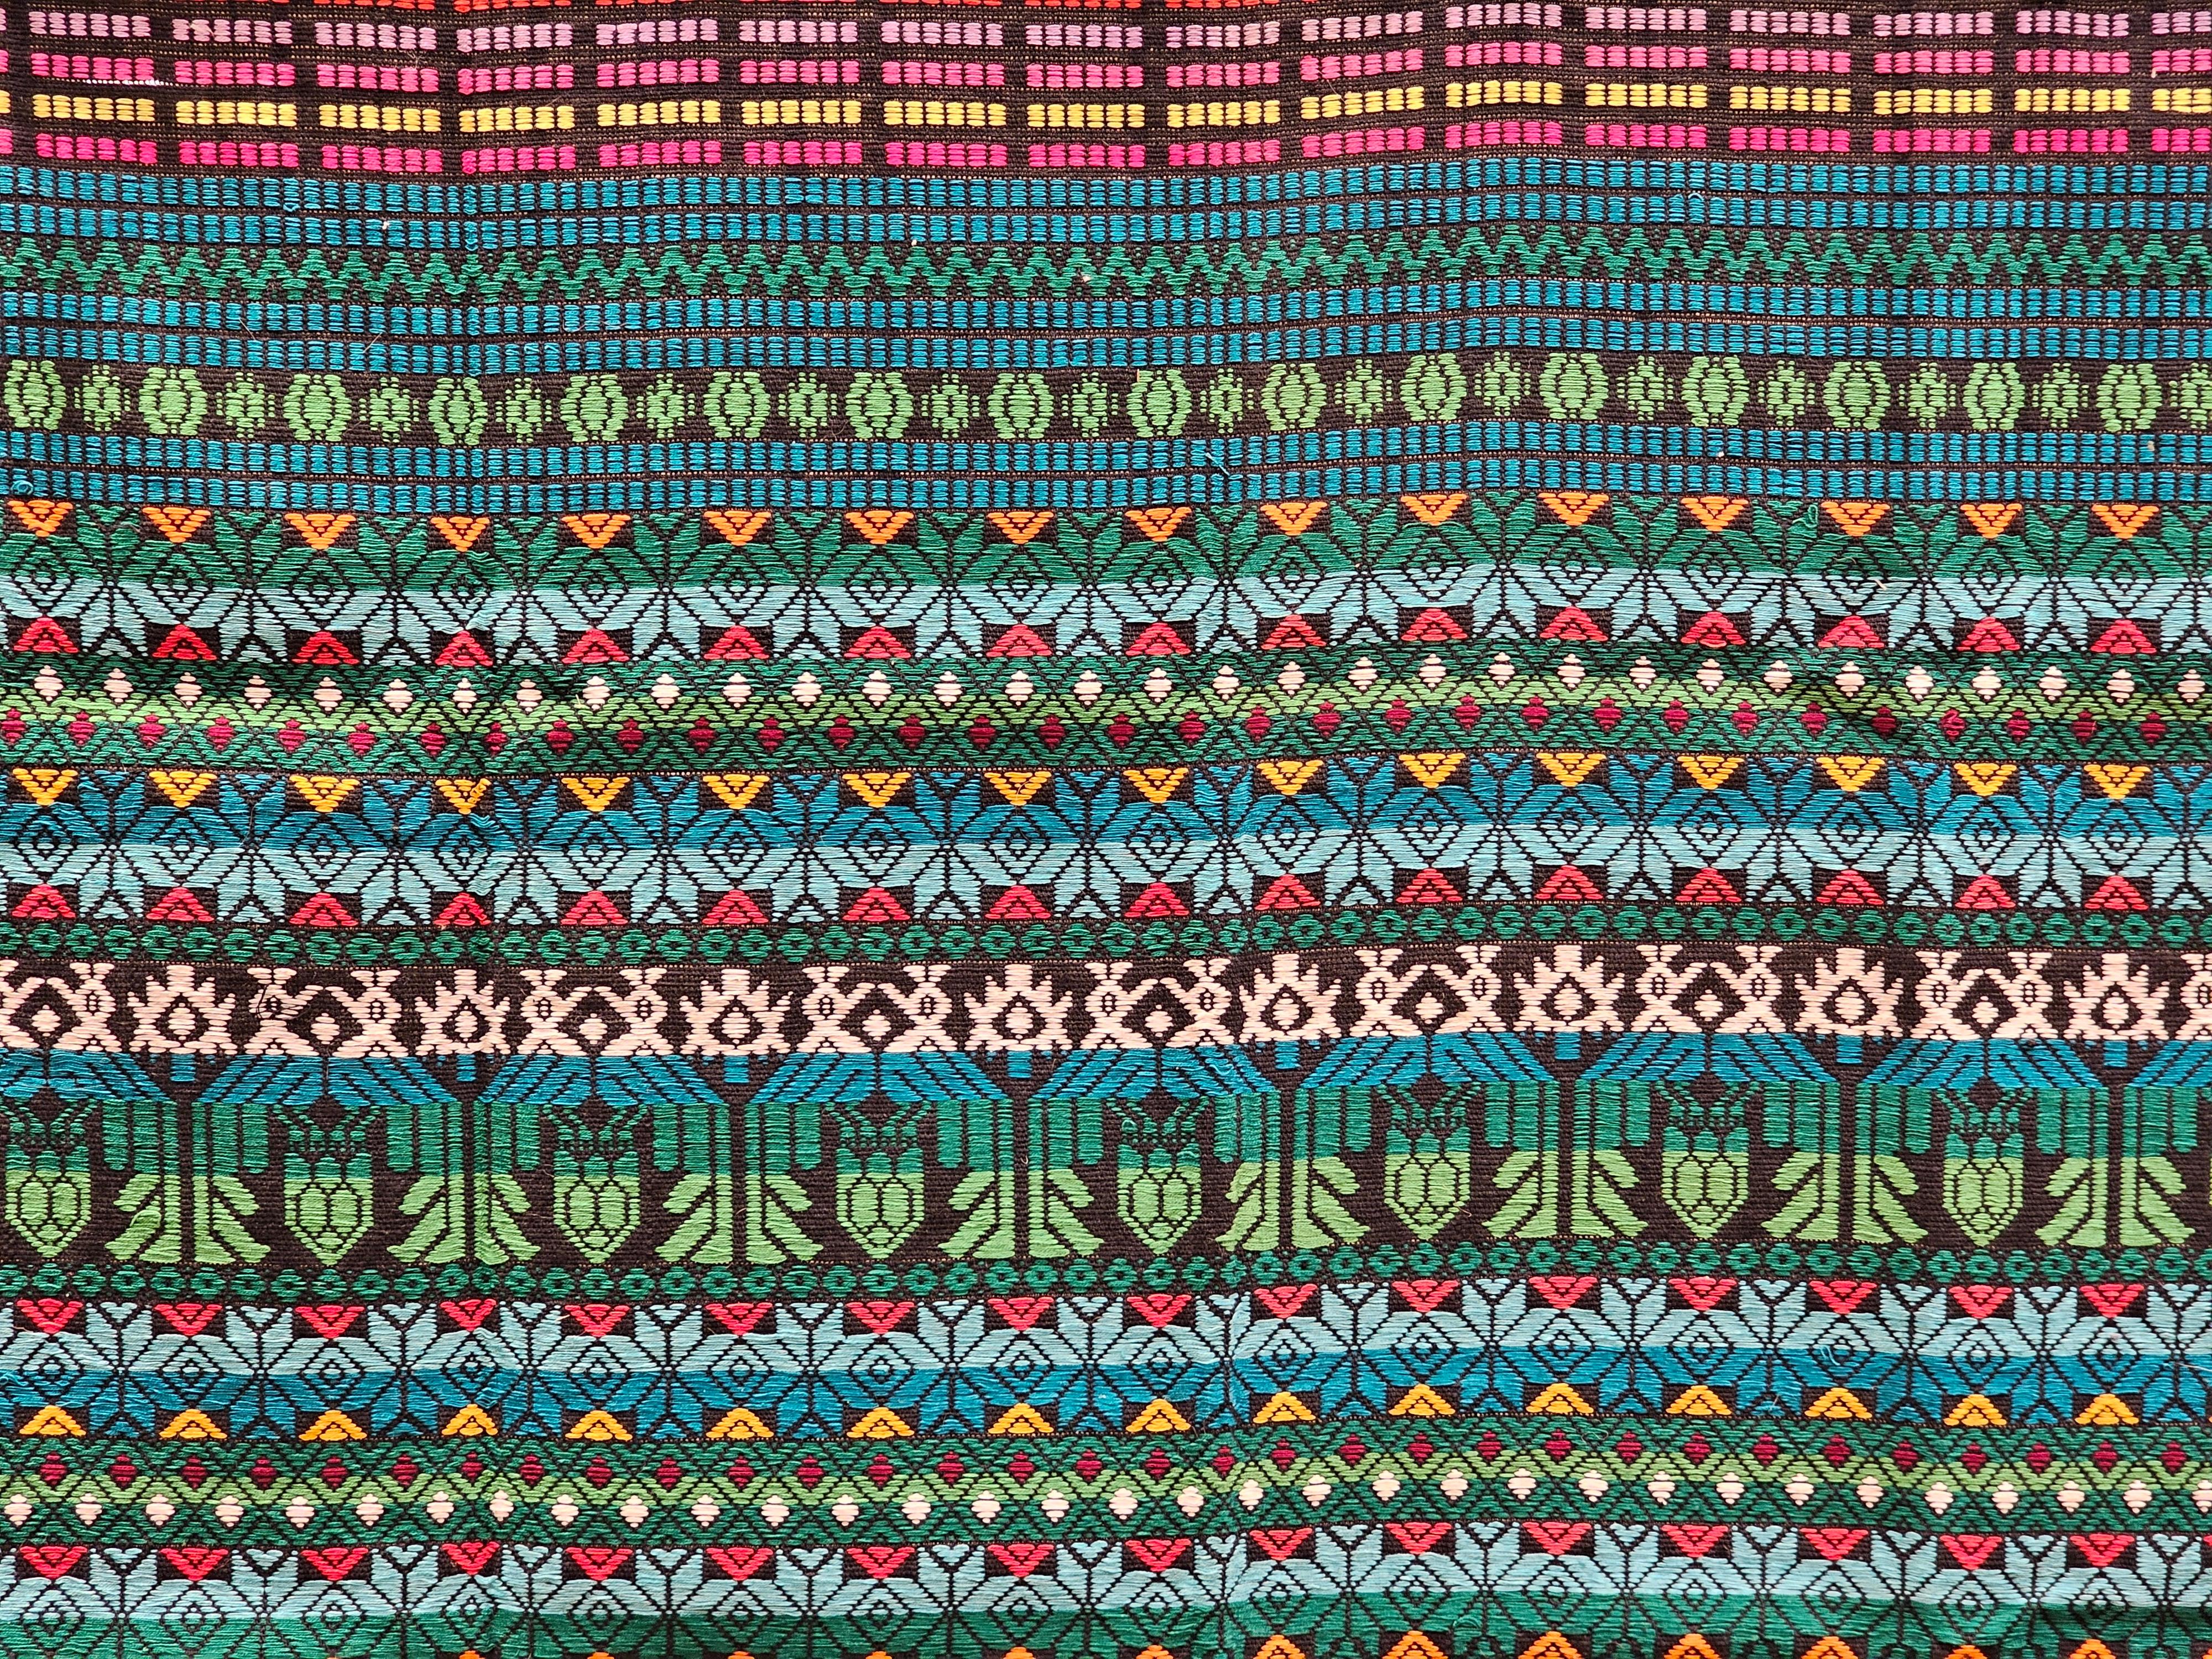 Peruvian Vintage South American Hand-woven Textile Panel in Green, Blue, Red, Black For Sale